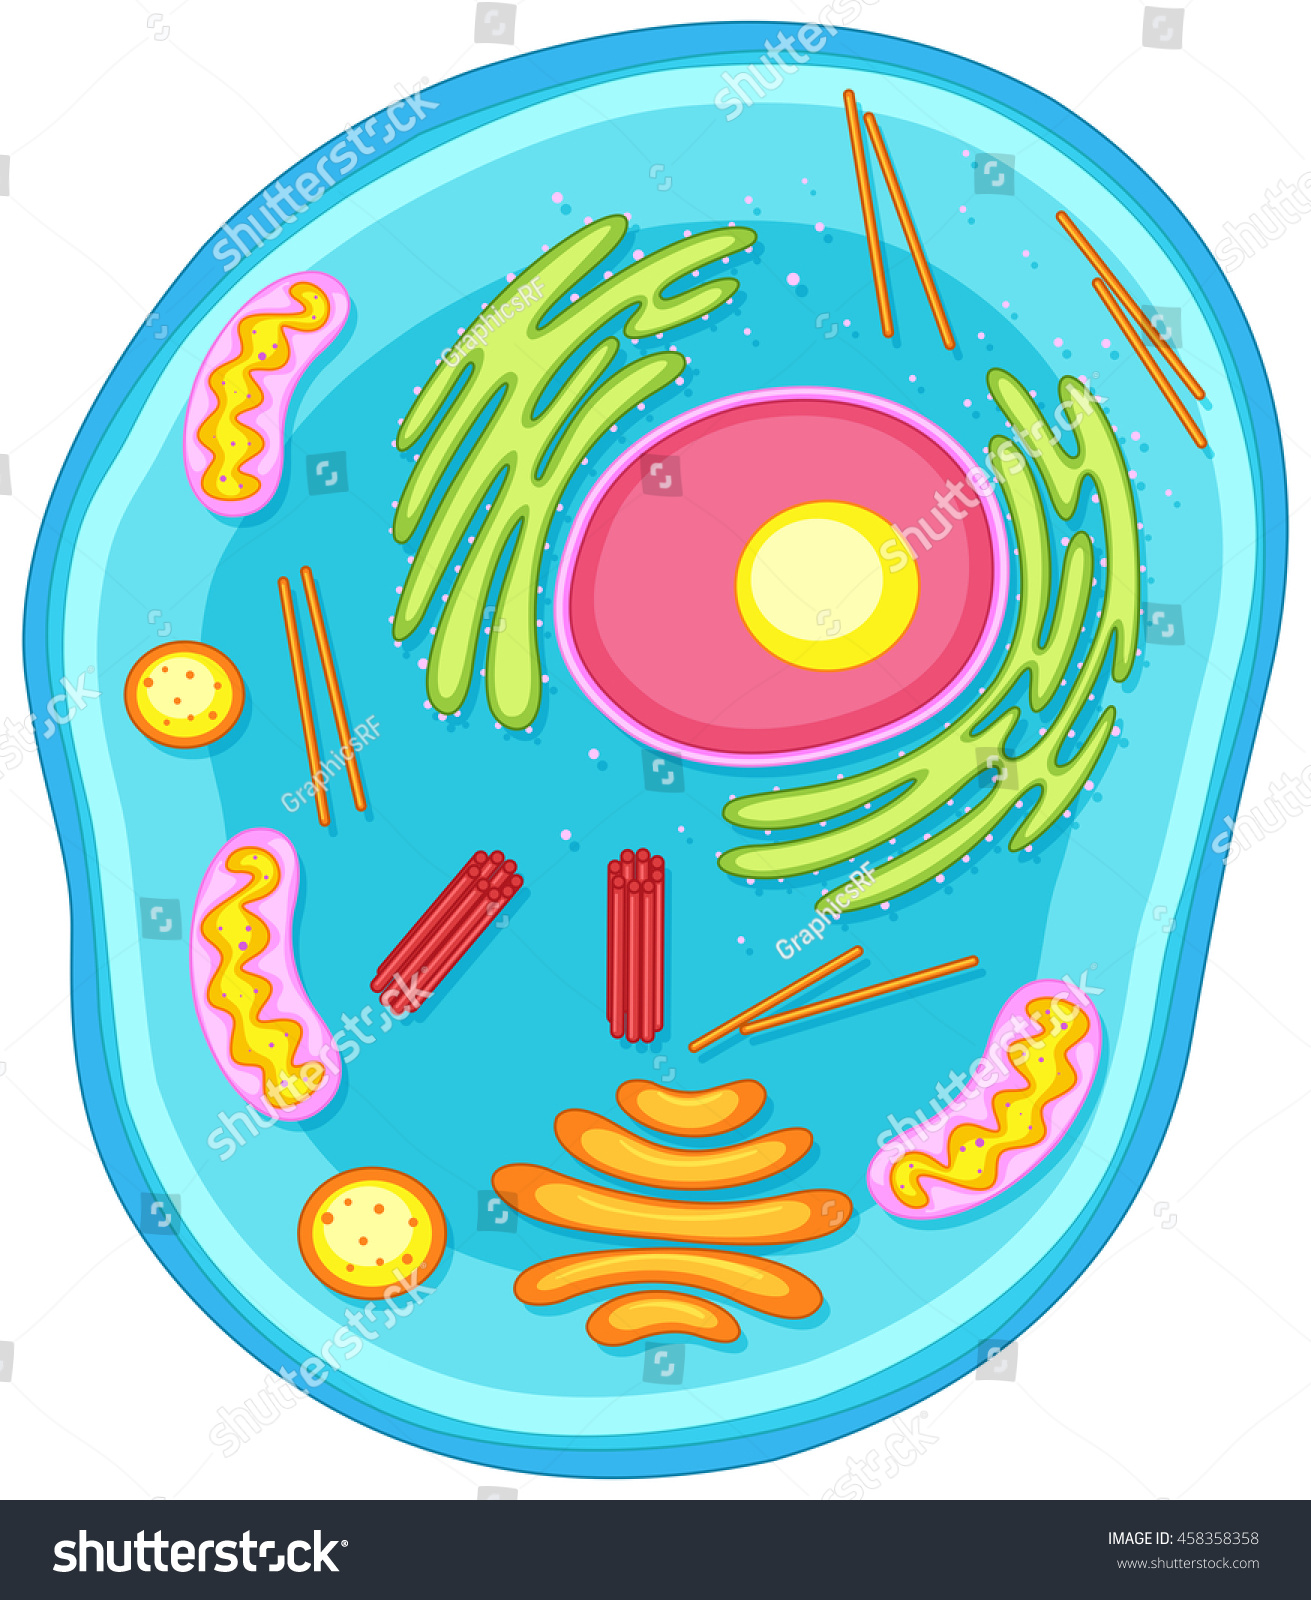 Animal Cell Diagram In Colors Illustration 458358358 Shutterstock